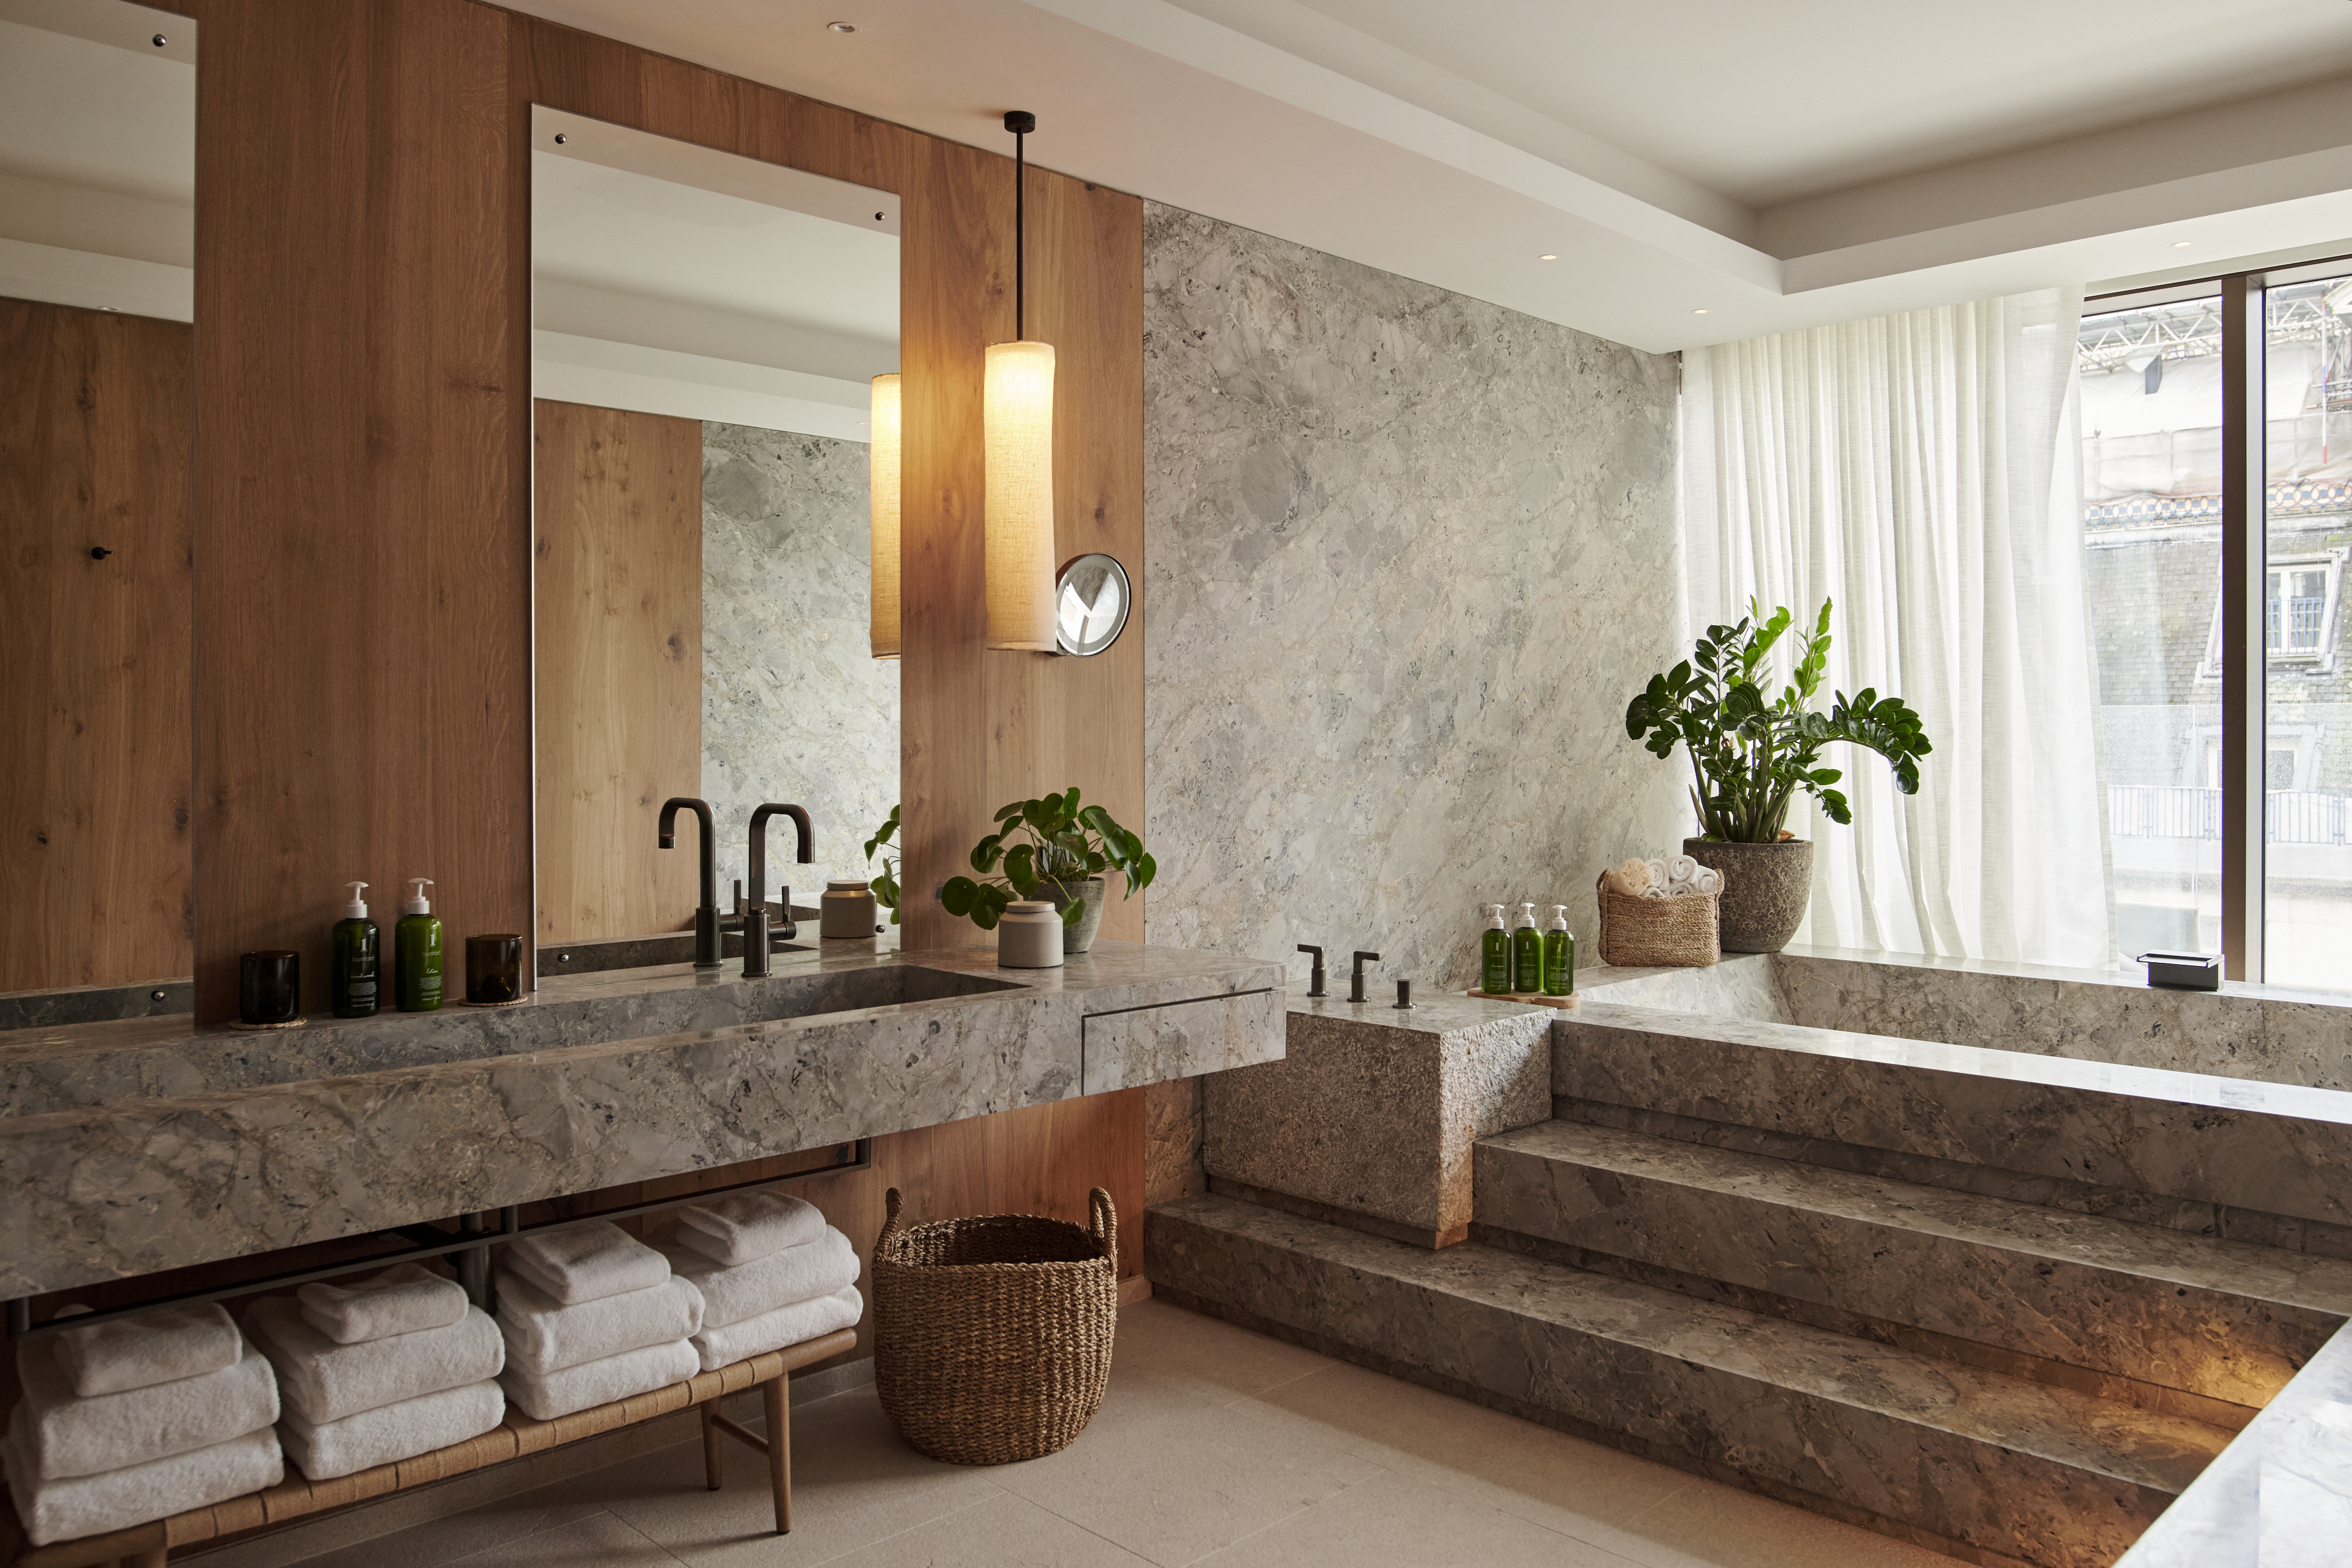 The floor and walls in the penthouse bathroom are crafted from Italian marble